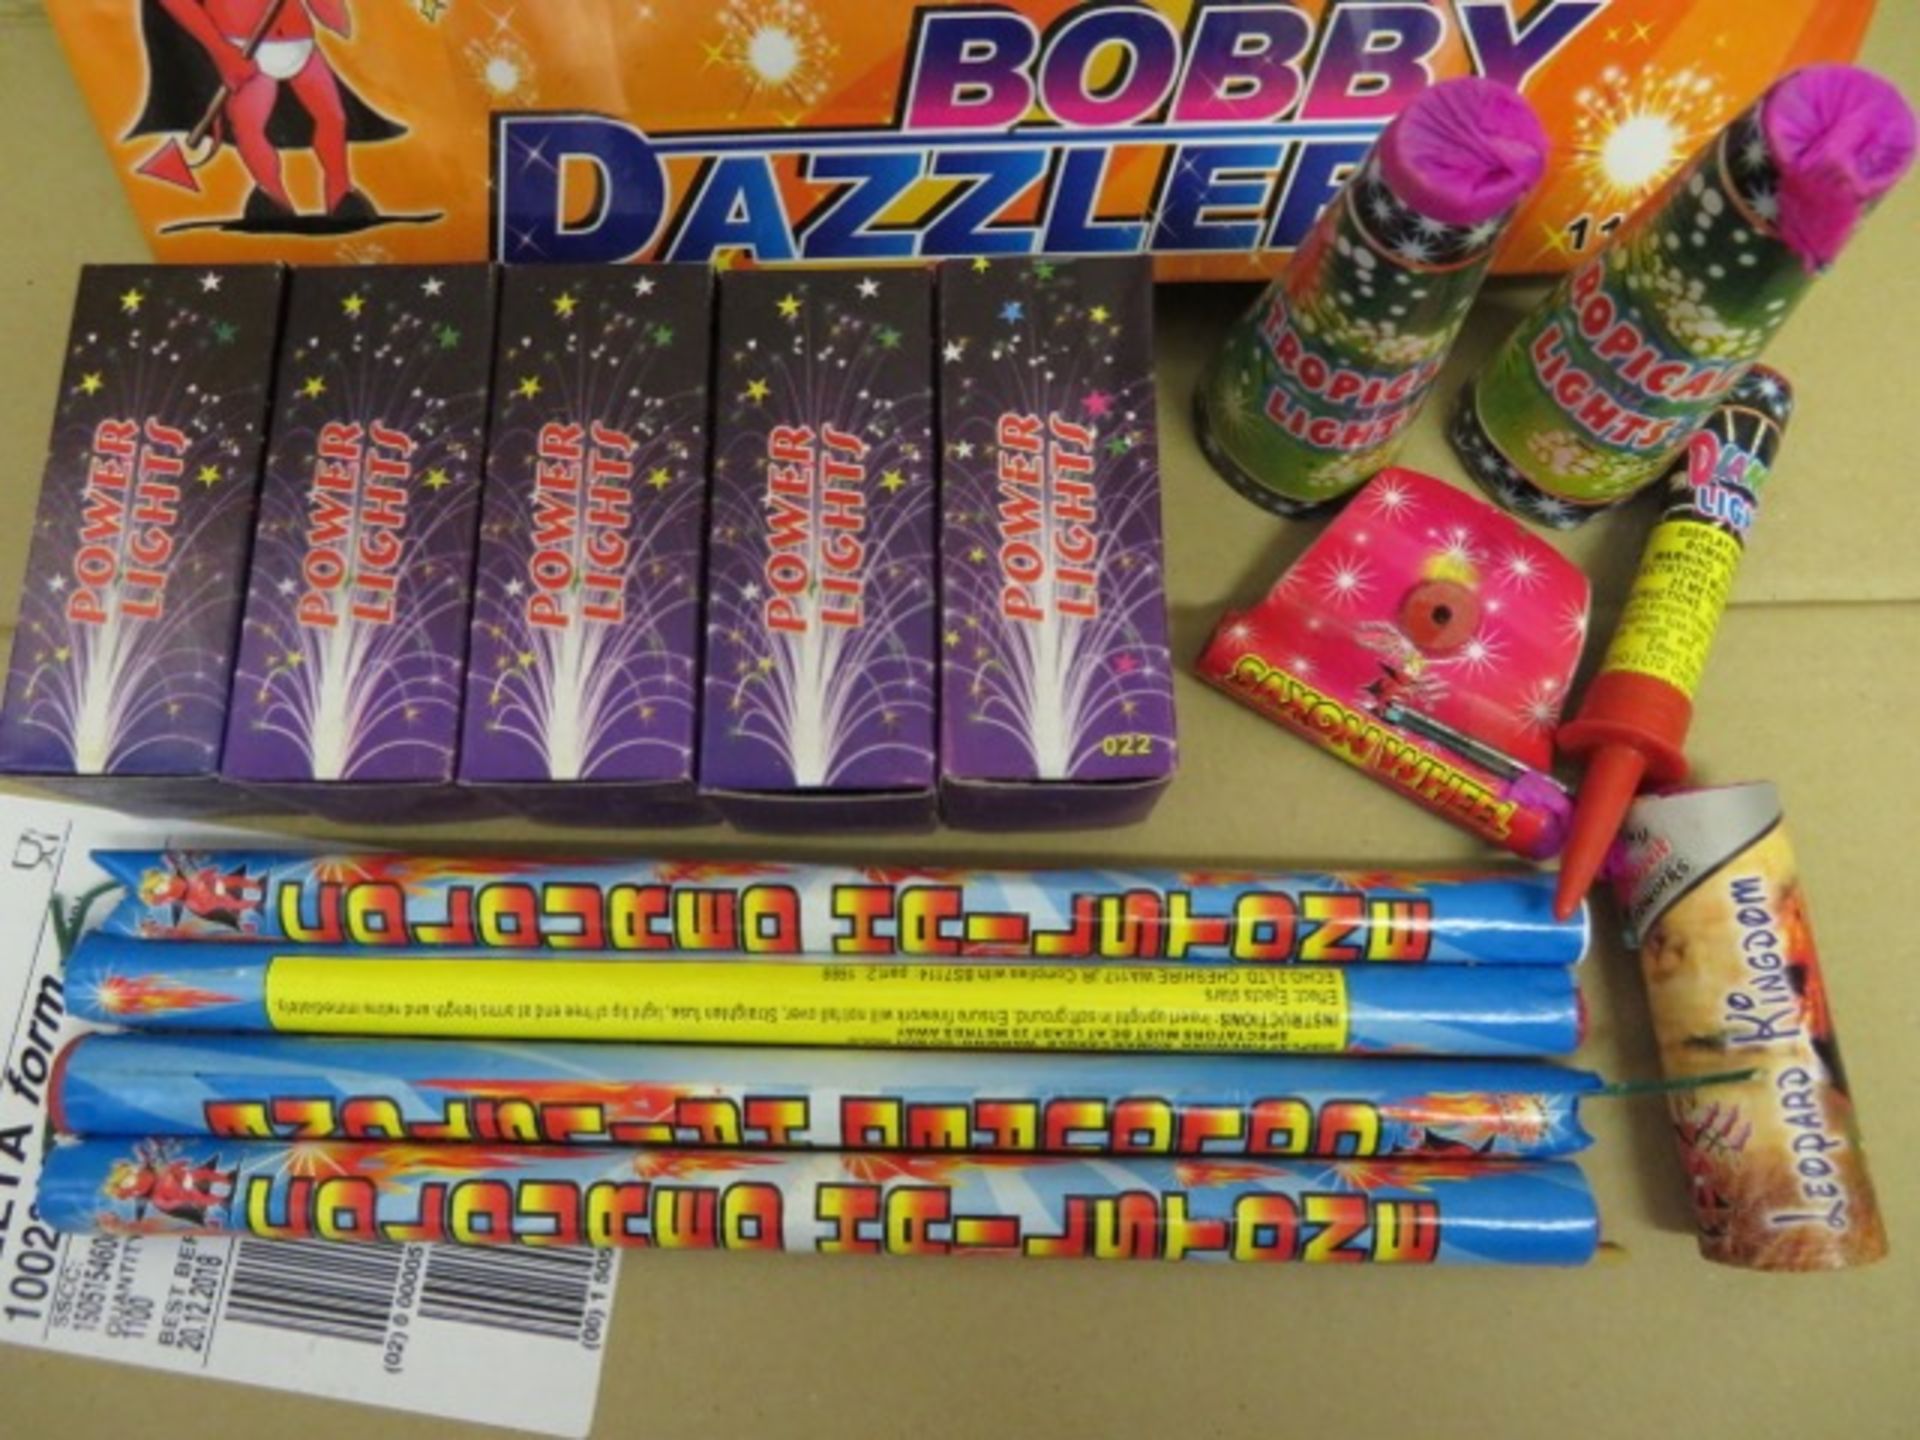 4 x 14 PIECE Bobby Dazzler Firework Selection Boxes. Total of 56 Fireworks to include: 20 x Power - Image 2 of 2